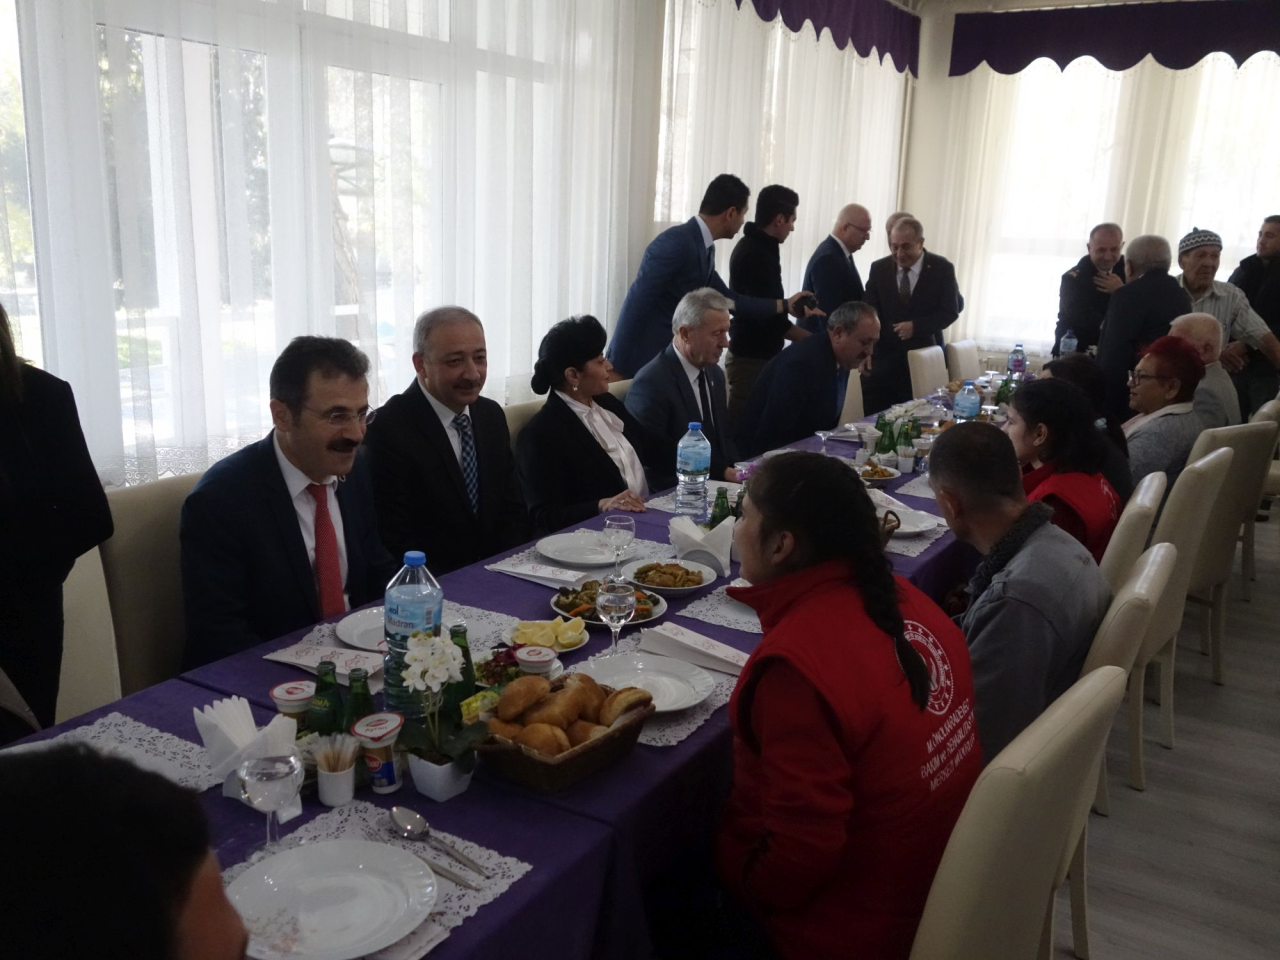 Our Rector Attended a Series of Events on the occasion of " World Disability Day Held on December 3"